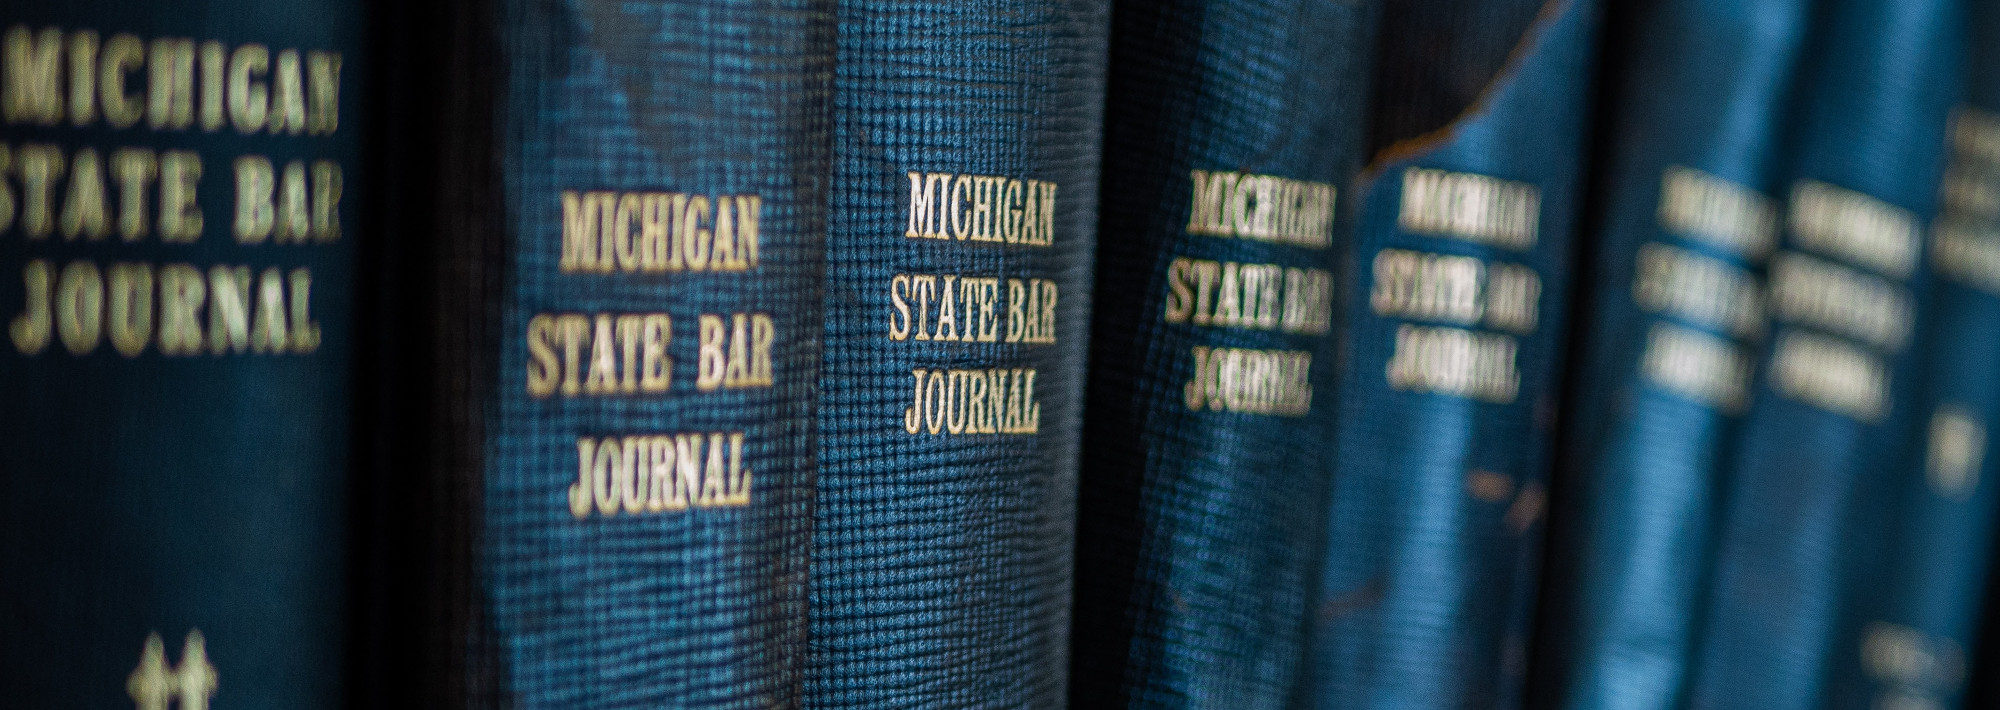 A row of books titled "Michigan State Bar Journal" (different volumes)